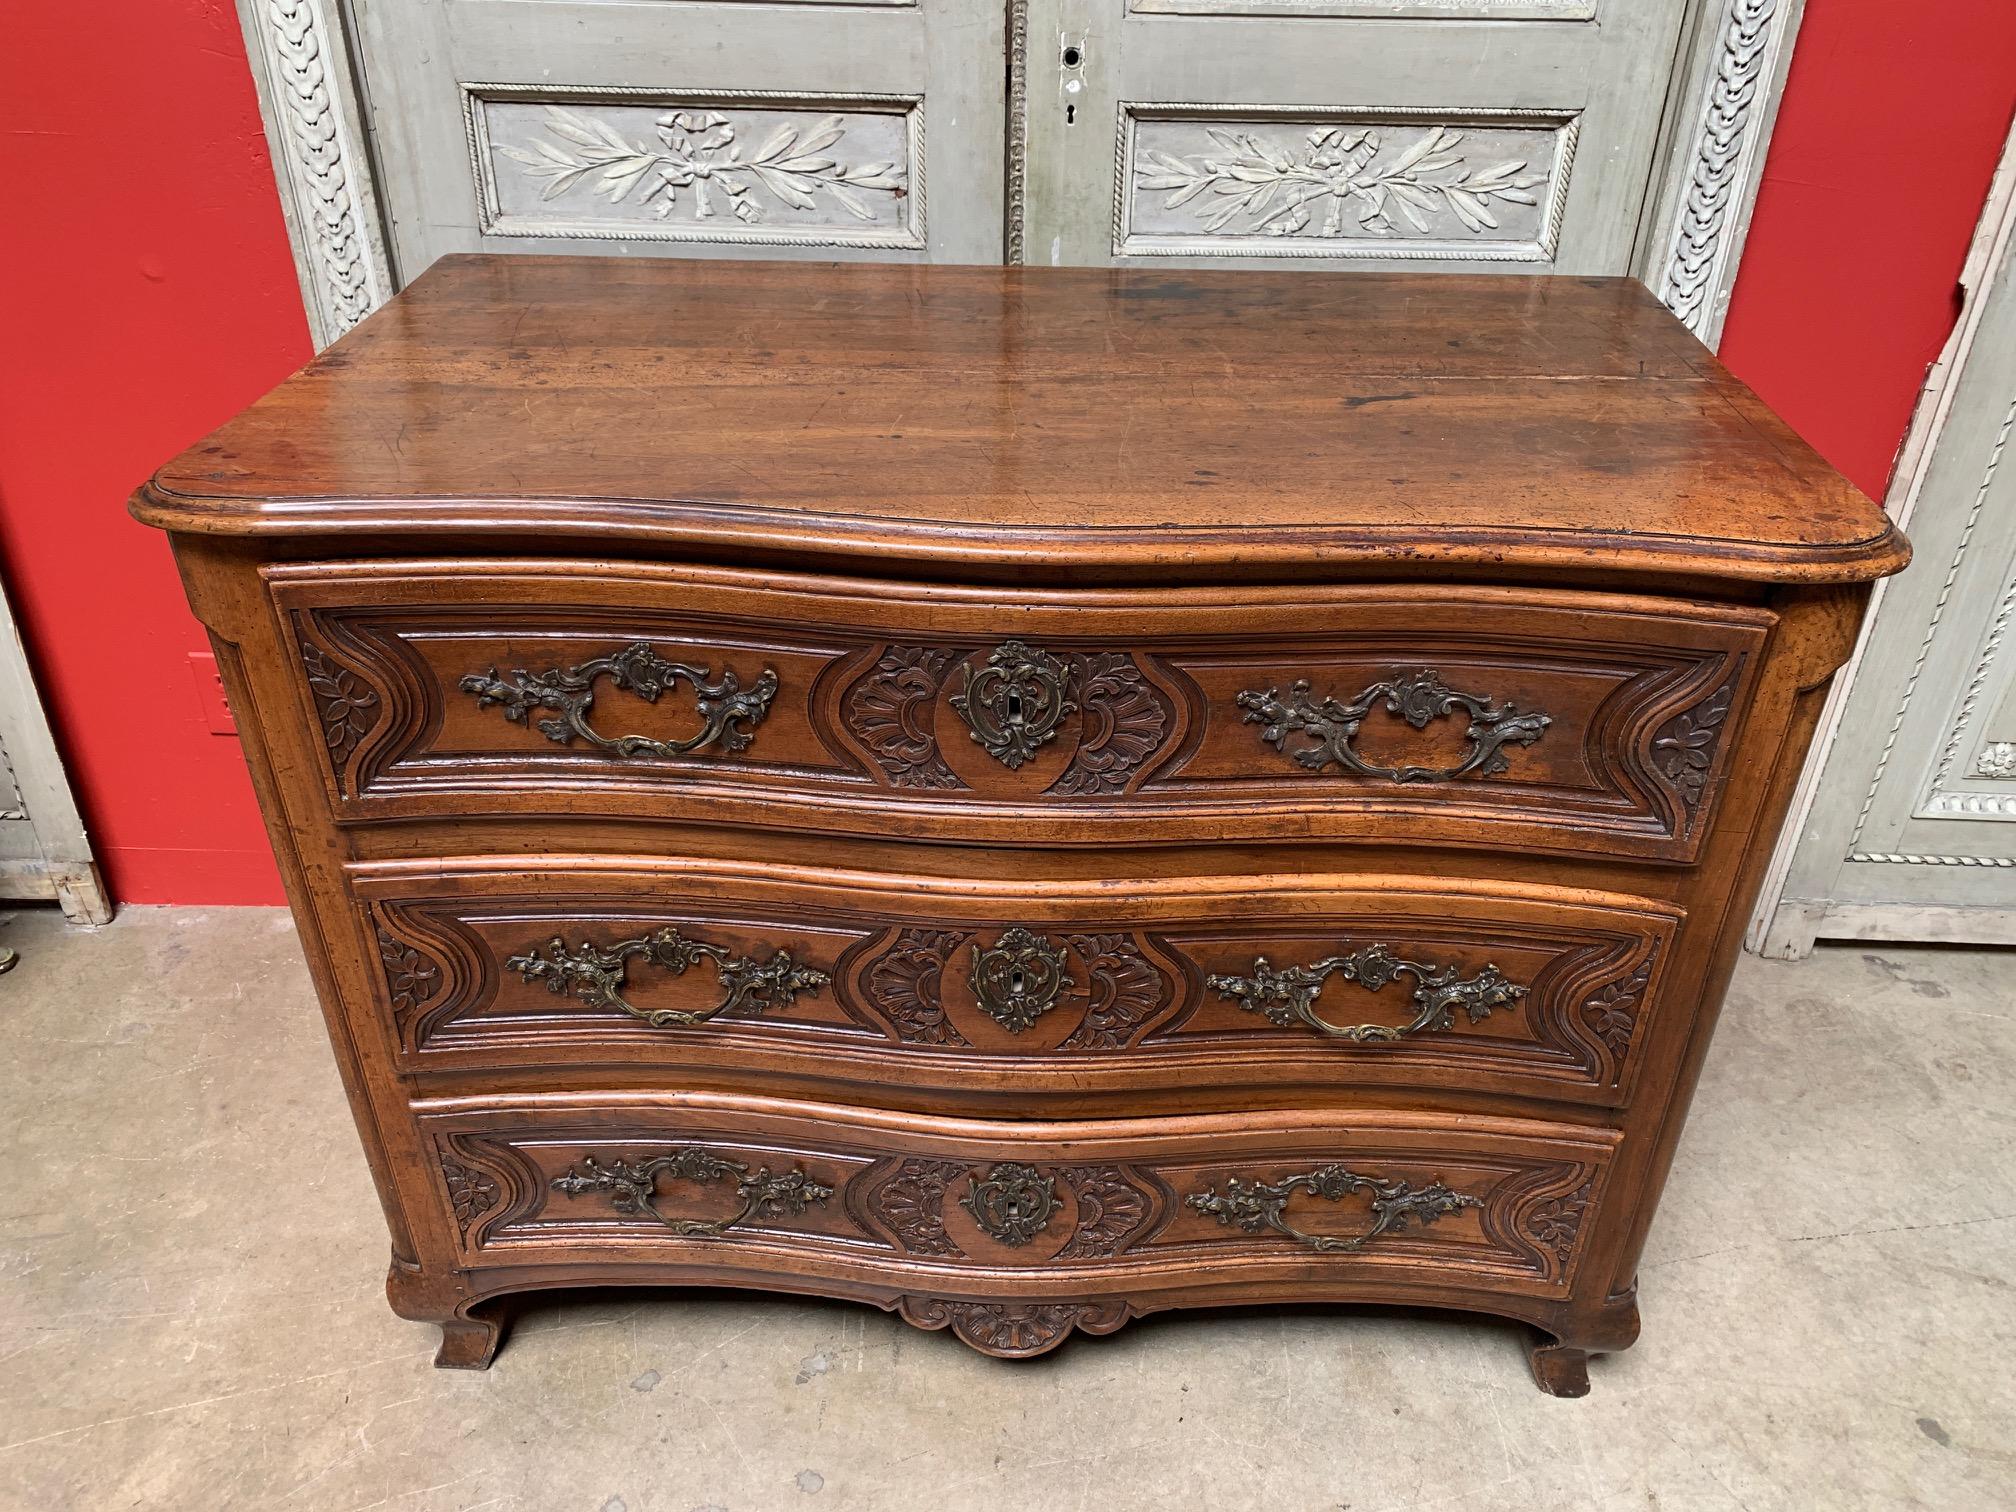 Exceptional 18th century Regence commode galbe´e (curved). Curved front with exquisite rocaille carvings, having three drawers and a shaped apron. Rests on short cabriole legs with sabot de biche. Beautiful bronze lock work, escutcheons and handles.